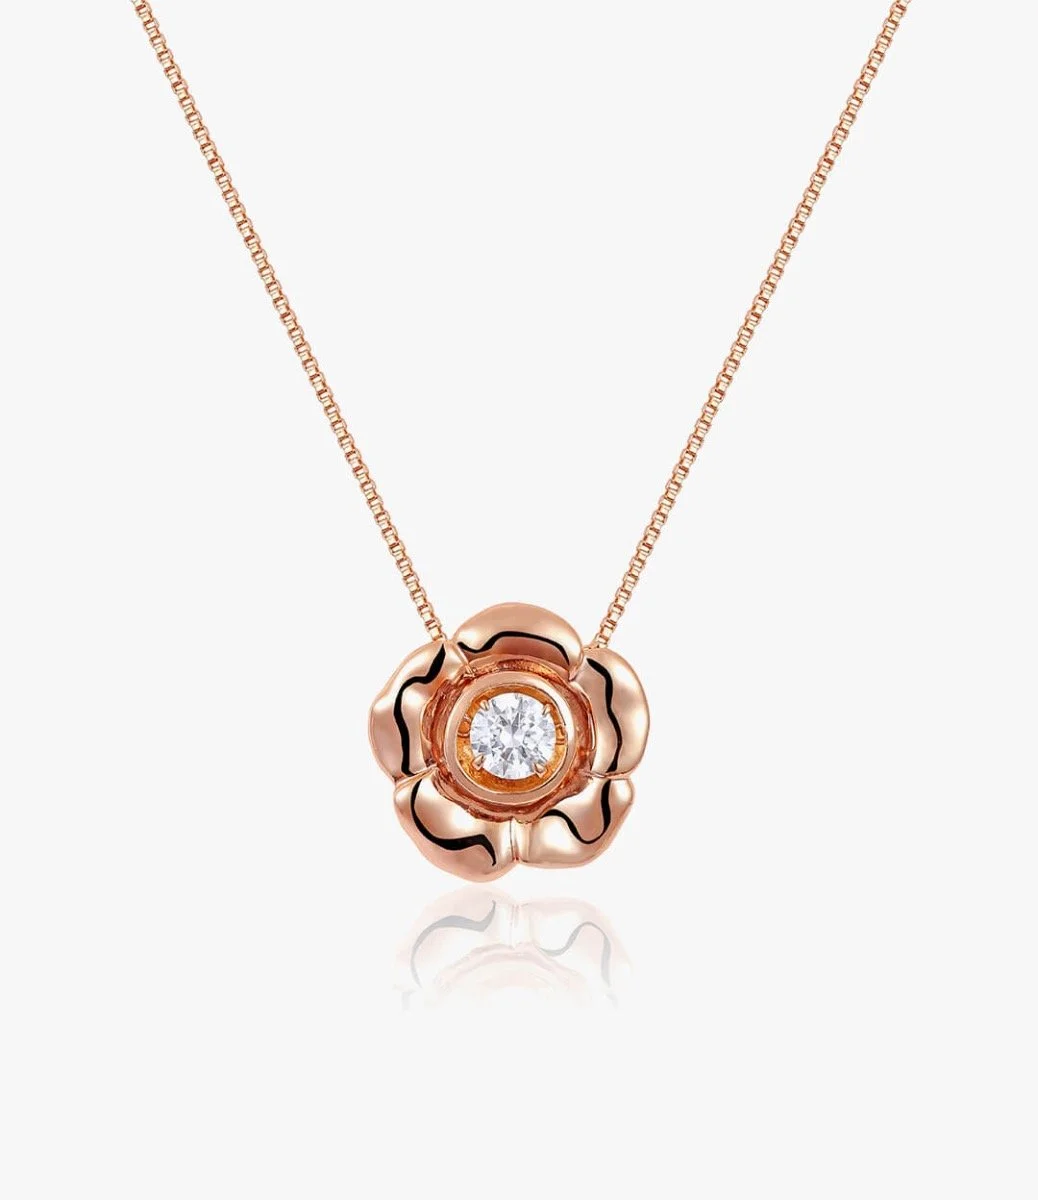 Gold-Plated Dancing Flower Necklace - Rose Gold